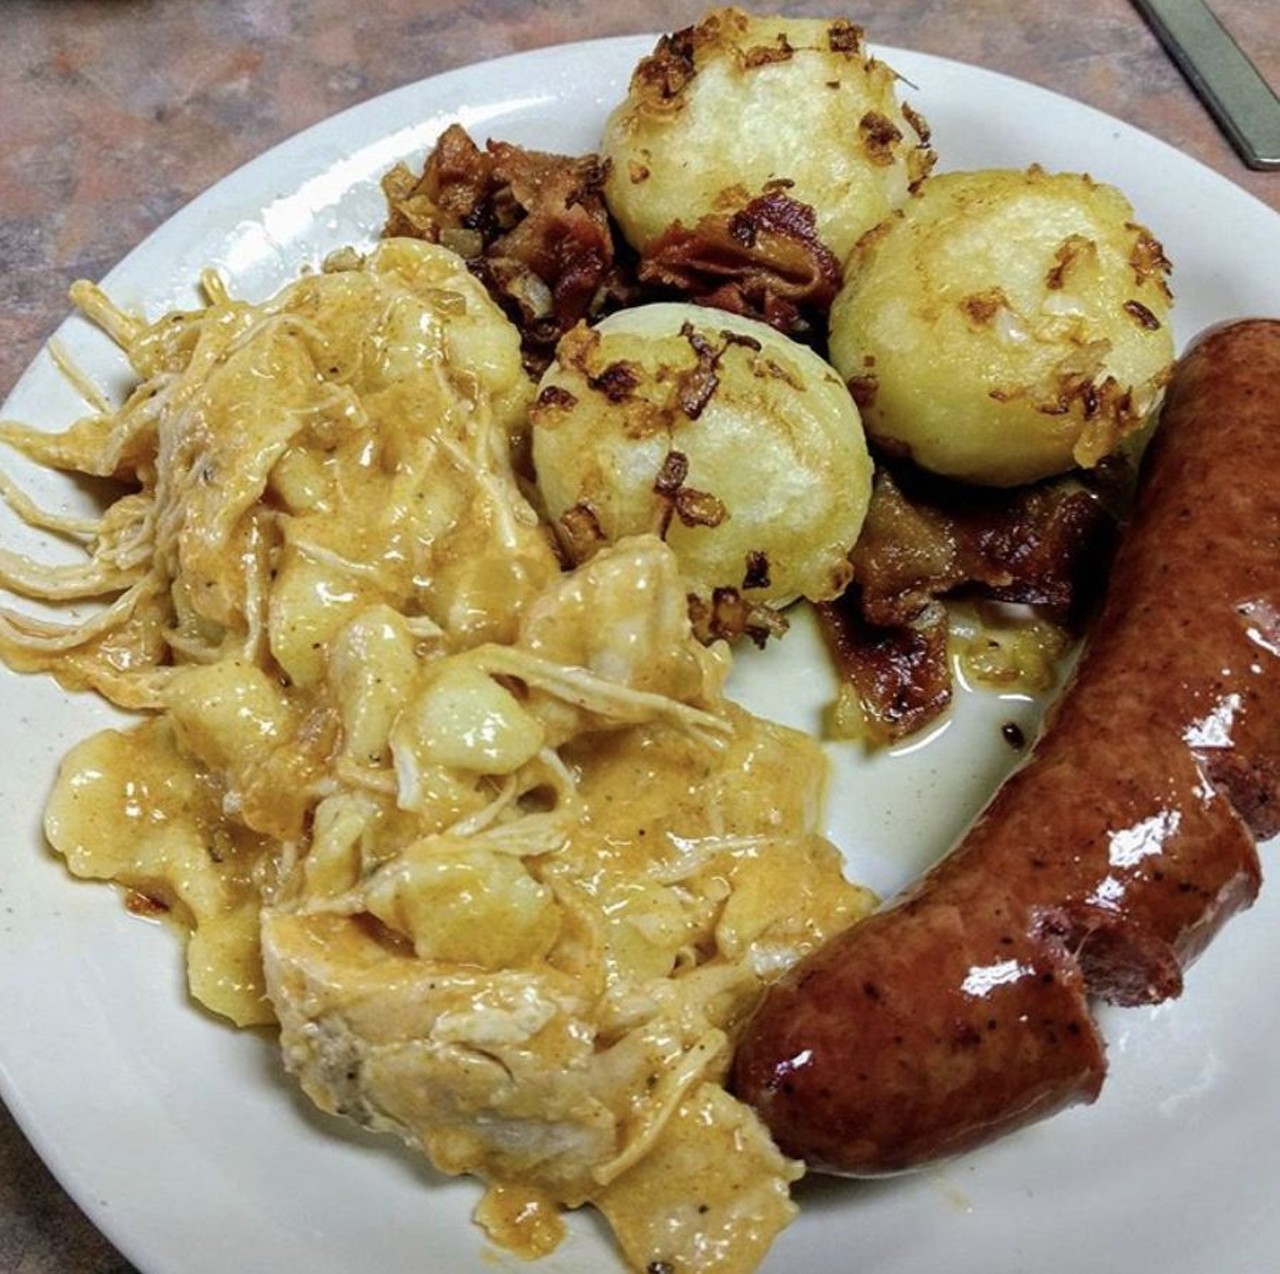  Little Polish Diner
5772 Ridge Rd., Parma, 440-842-8212
A Parma staple, this unassuming eatery is a local favorite. Stop in for home cooked polish dishes served in hearty portions. 
Photo via  ohmibear/Instagram